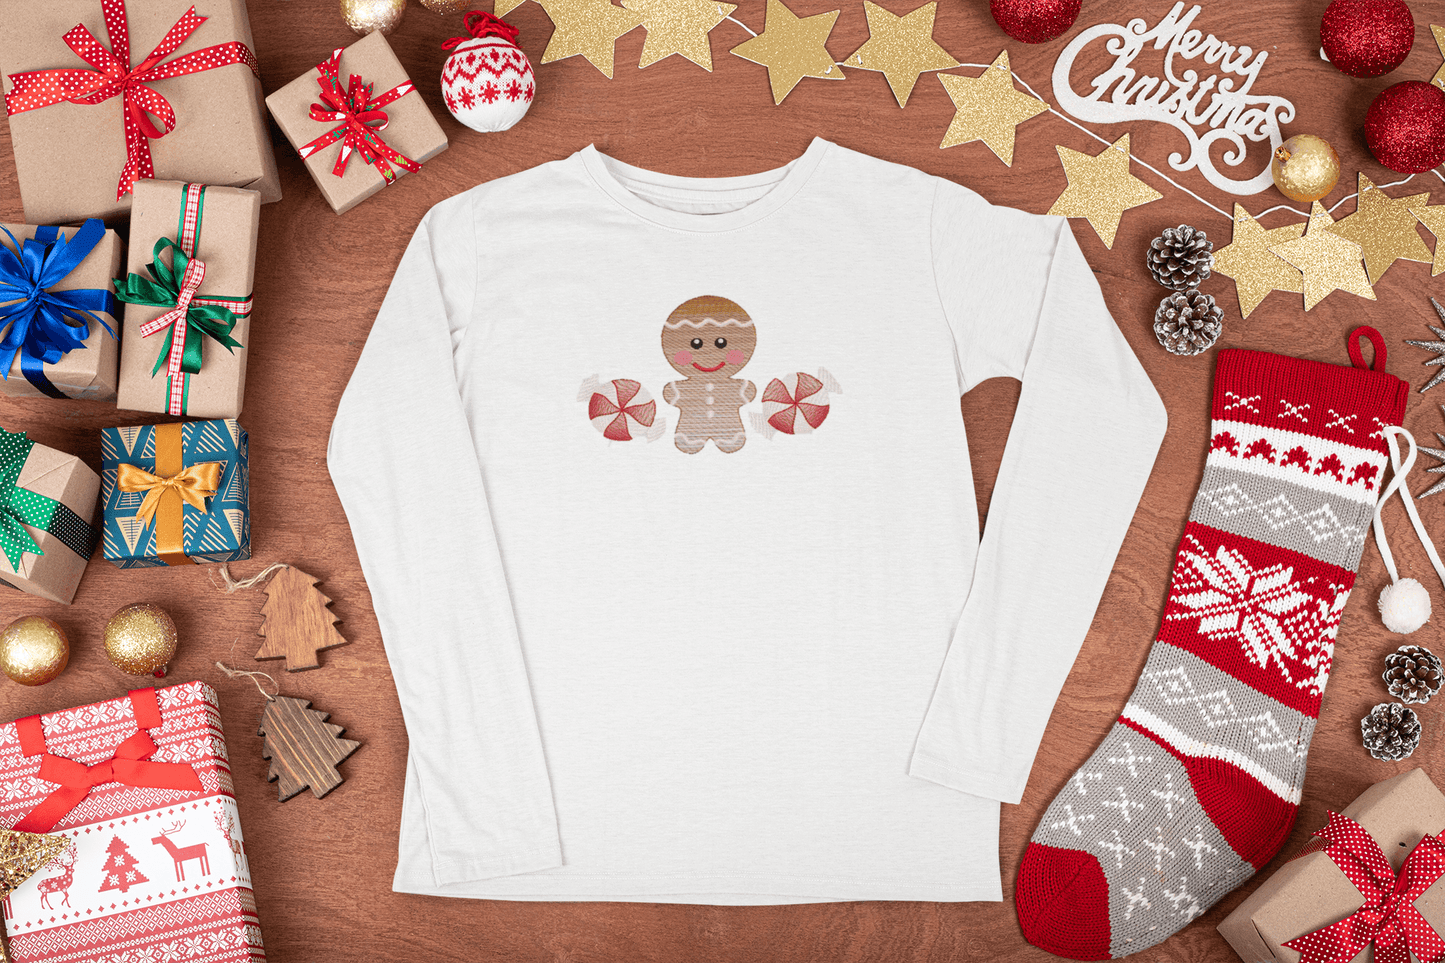 Christmas Gingerbread Cookie Embroidery T-Shirt - numonet